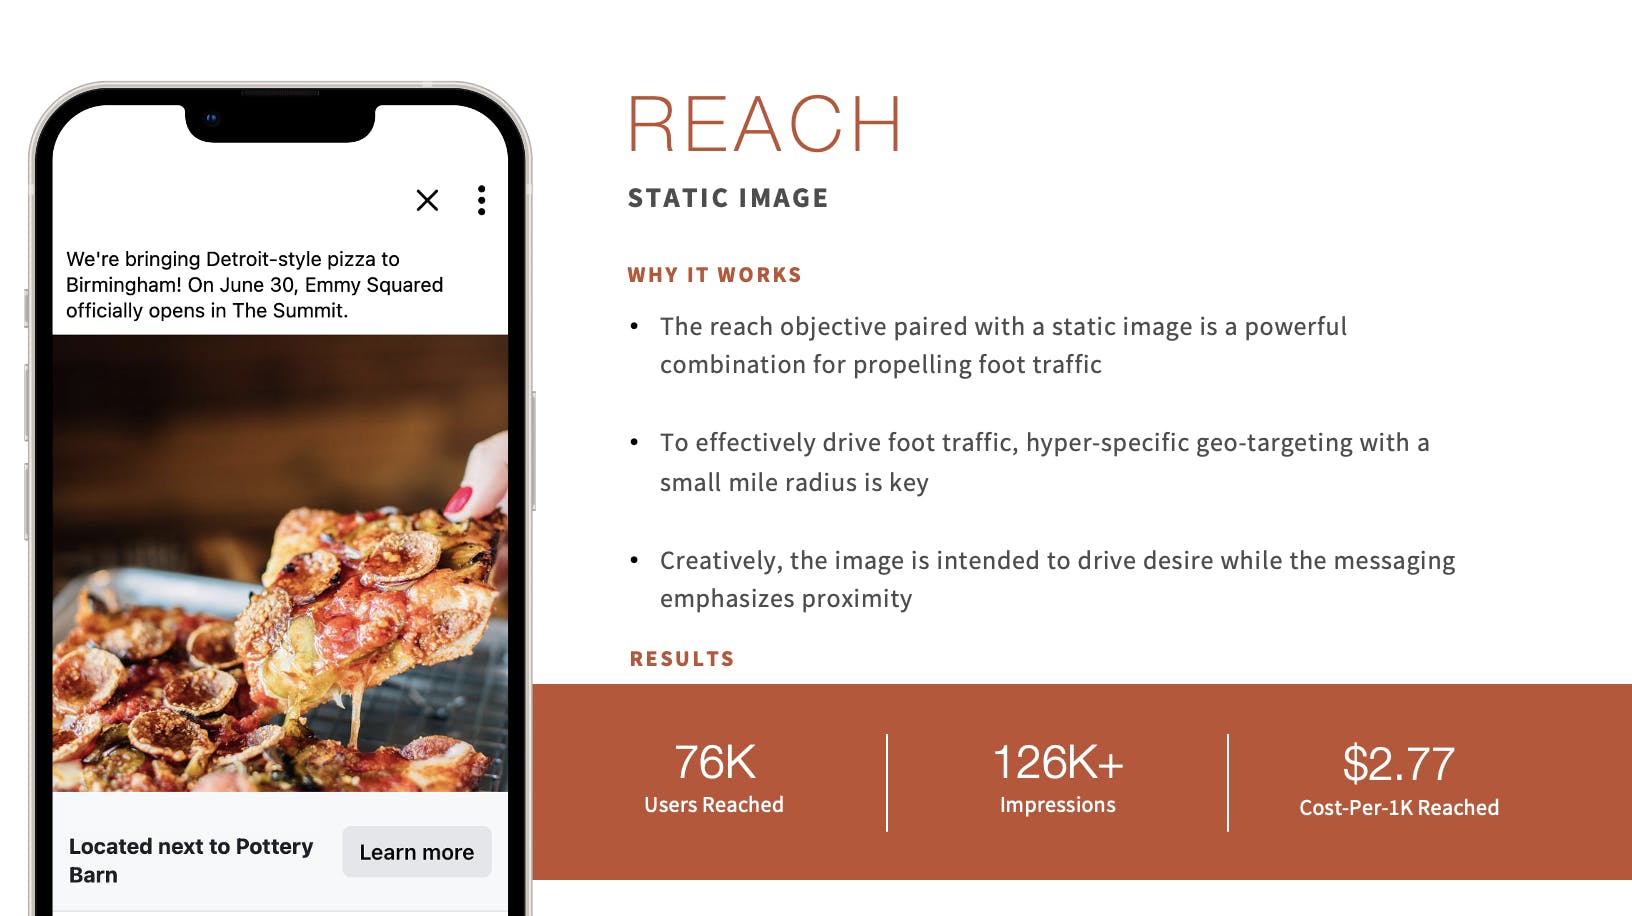 example of static image reach ad